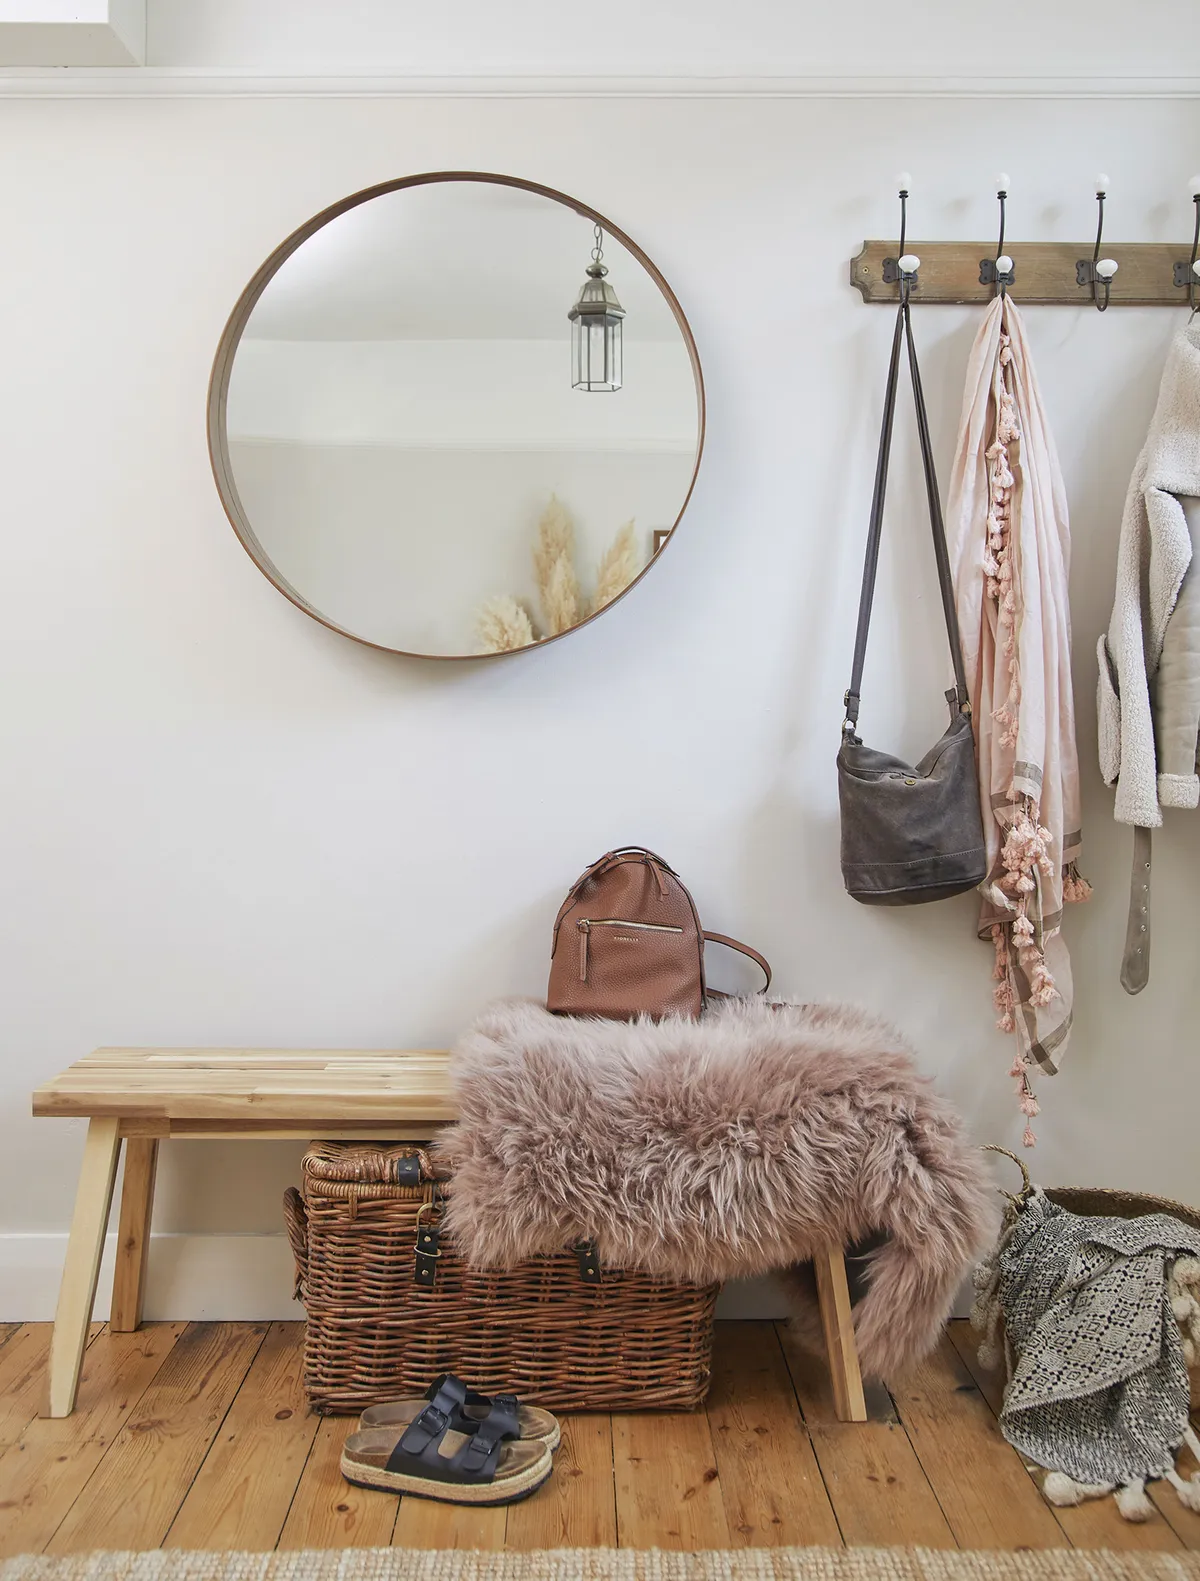 ‘I bought the IKEA mirror to go above the fireplace, but I leaned it against this wall while moving some things about, and it looked good here so it stayed. This is often quite a messy spot, so the basket keeps shoes tidy’